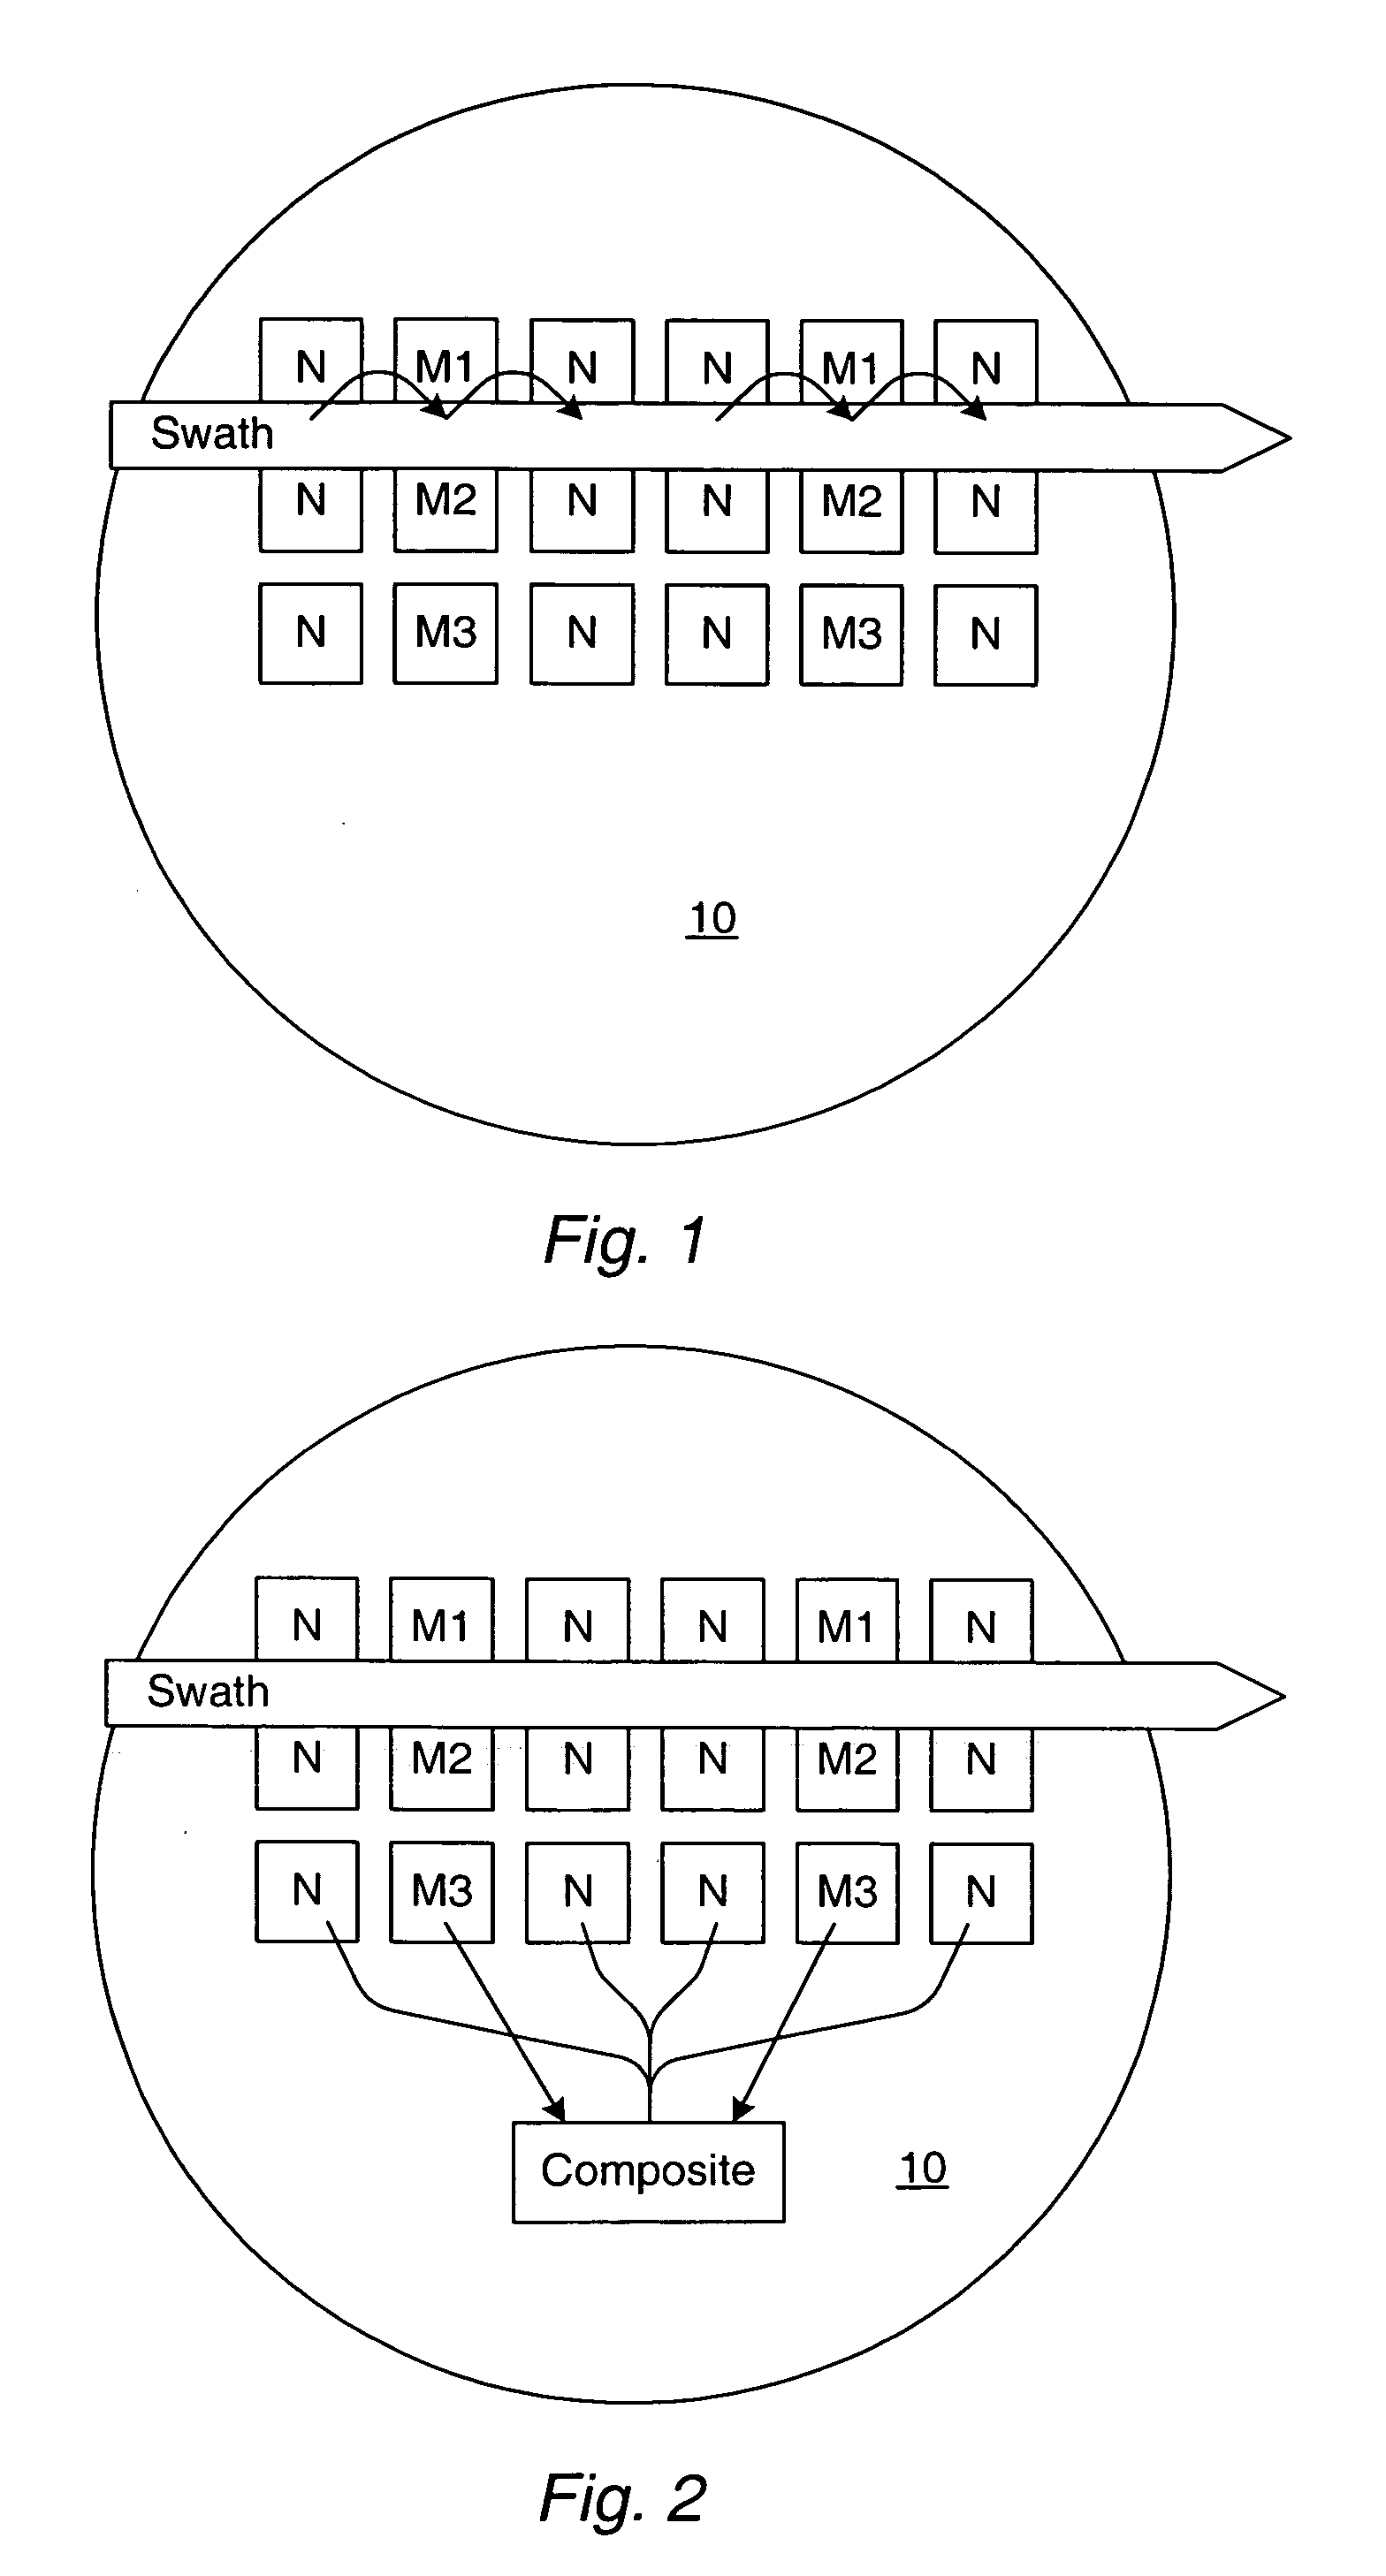 Computer-implemented methods for detecting and/or sorting defects in a design pattern of a reticle